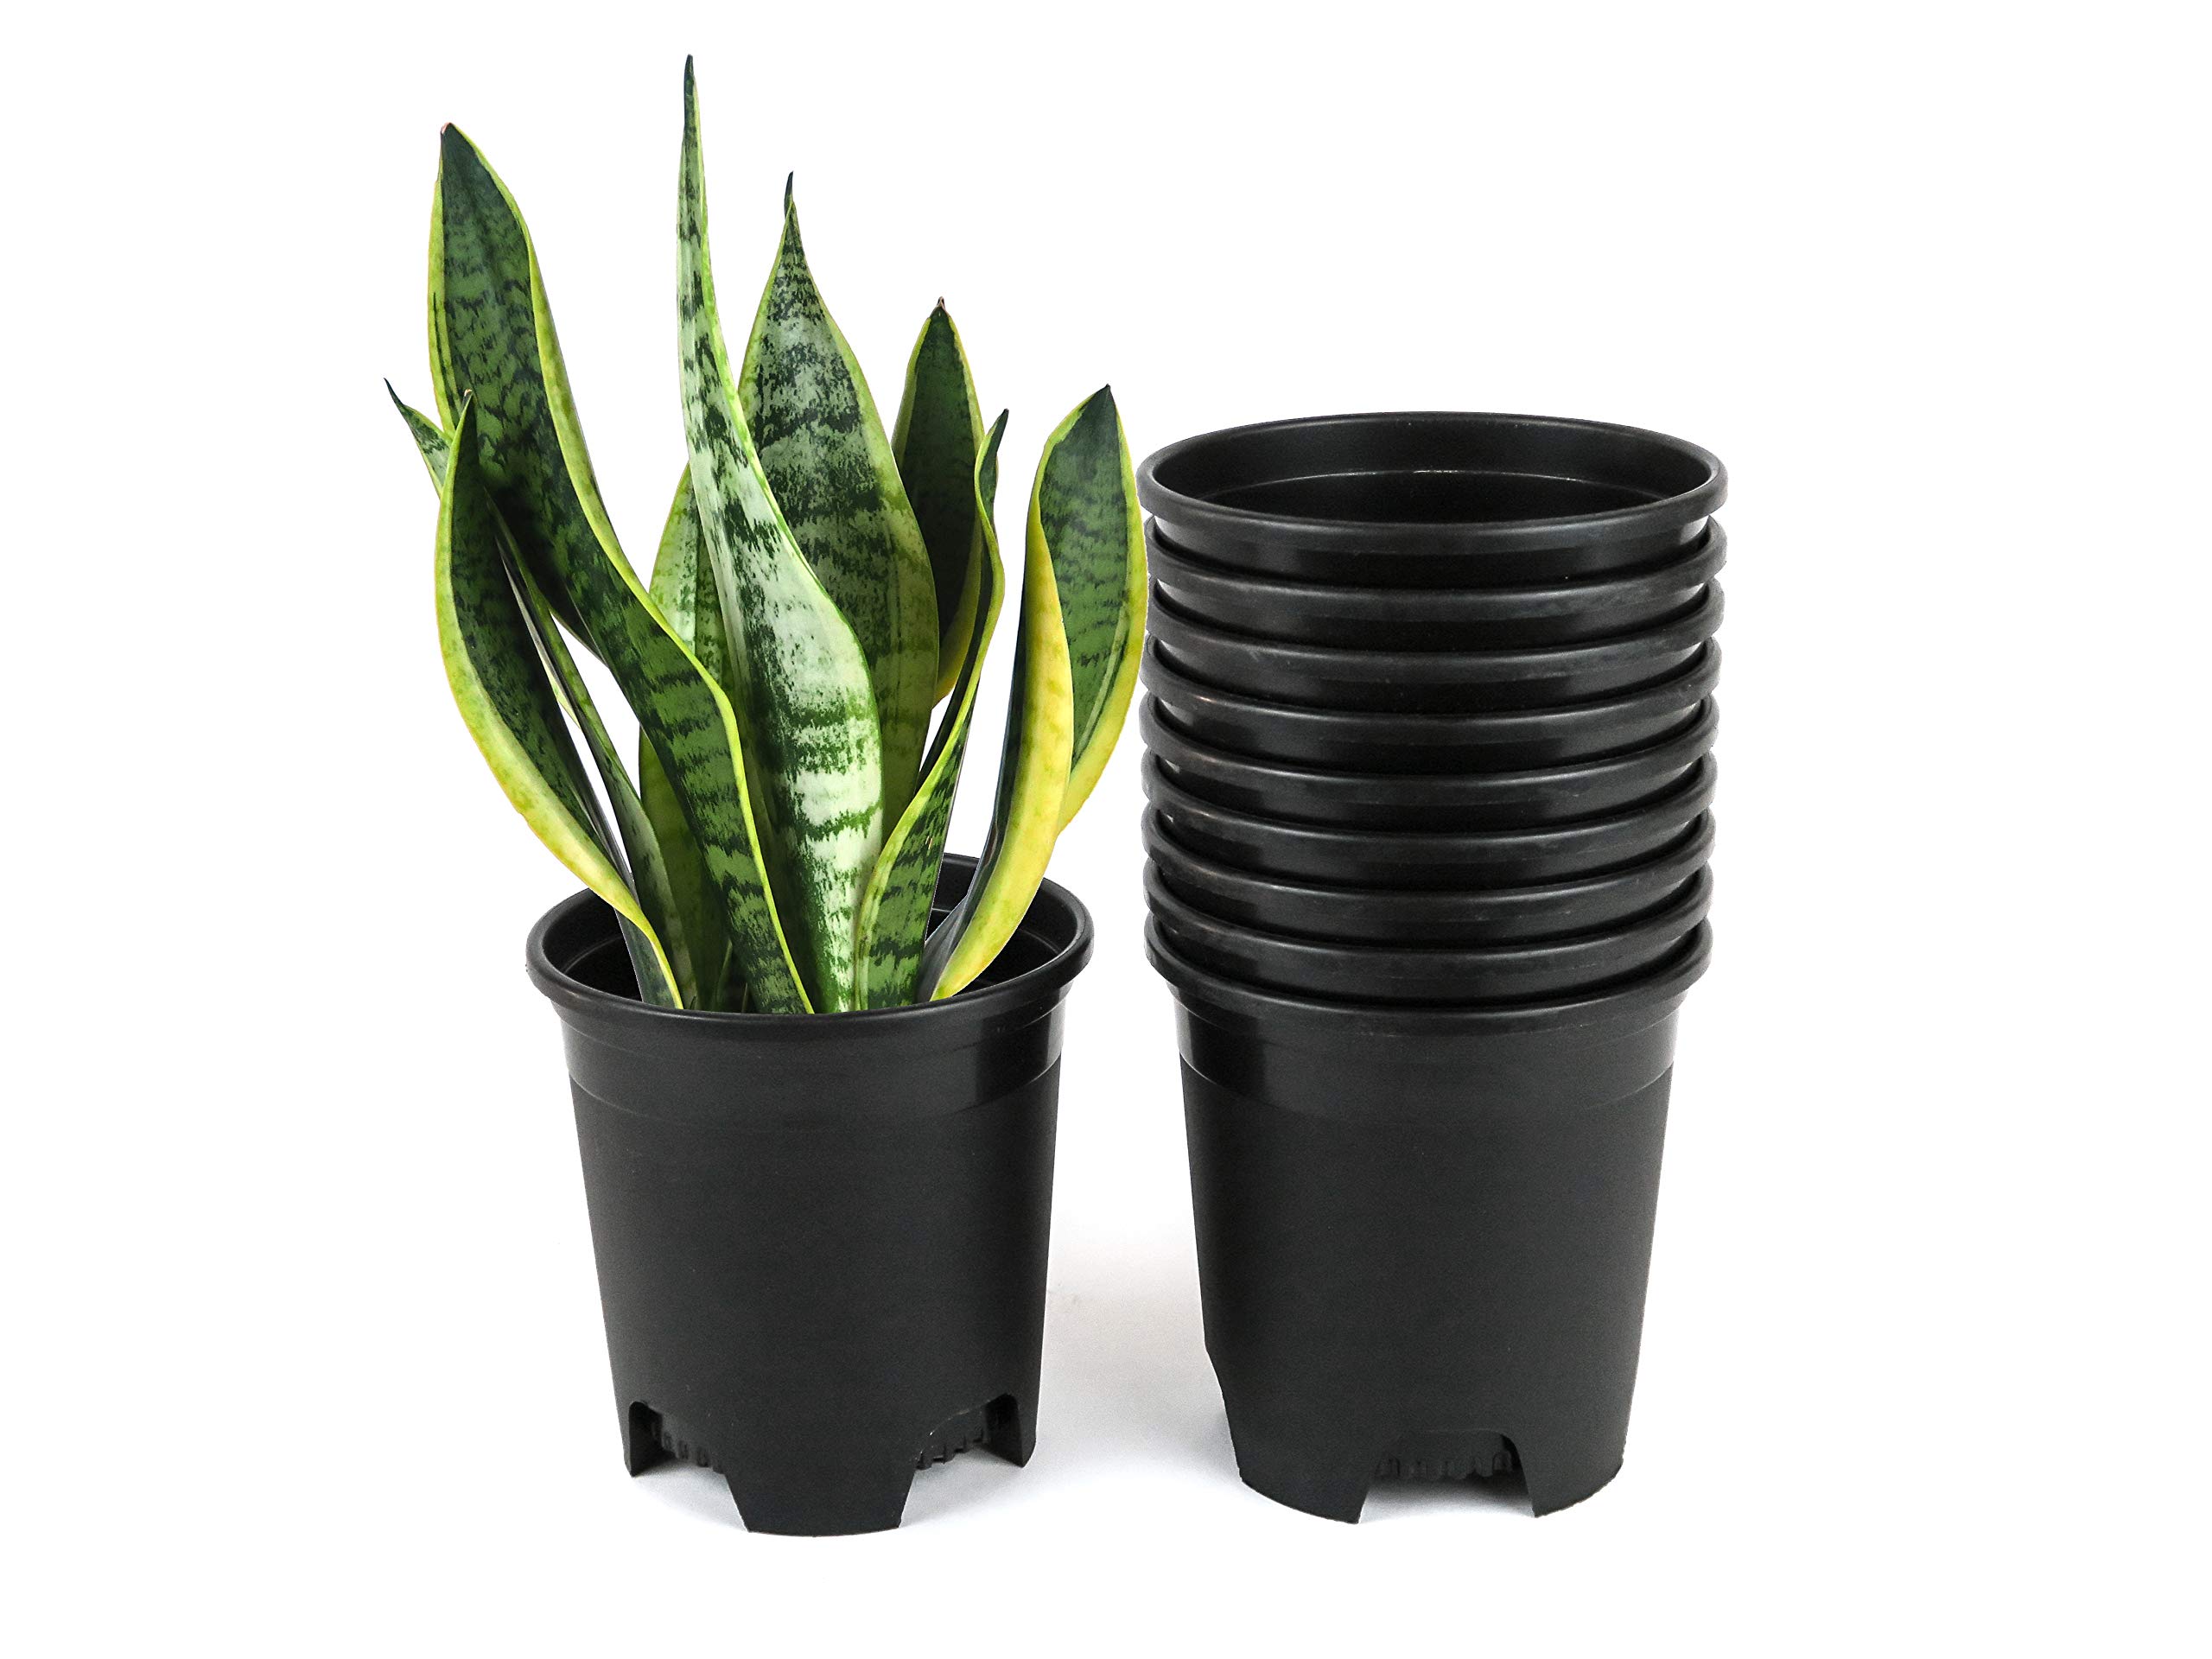 Cotta Planters 45 Inch Nursery Pot Plastic Planters For Outdoor Indoor Plants Gardening Flower Pots 035 Gallon 10-Pack Black Pot Liners With Dr